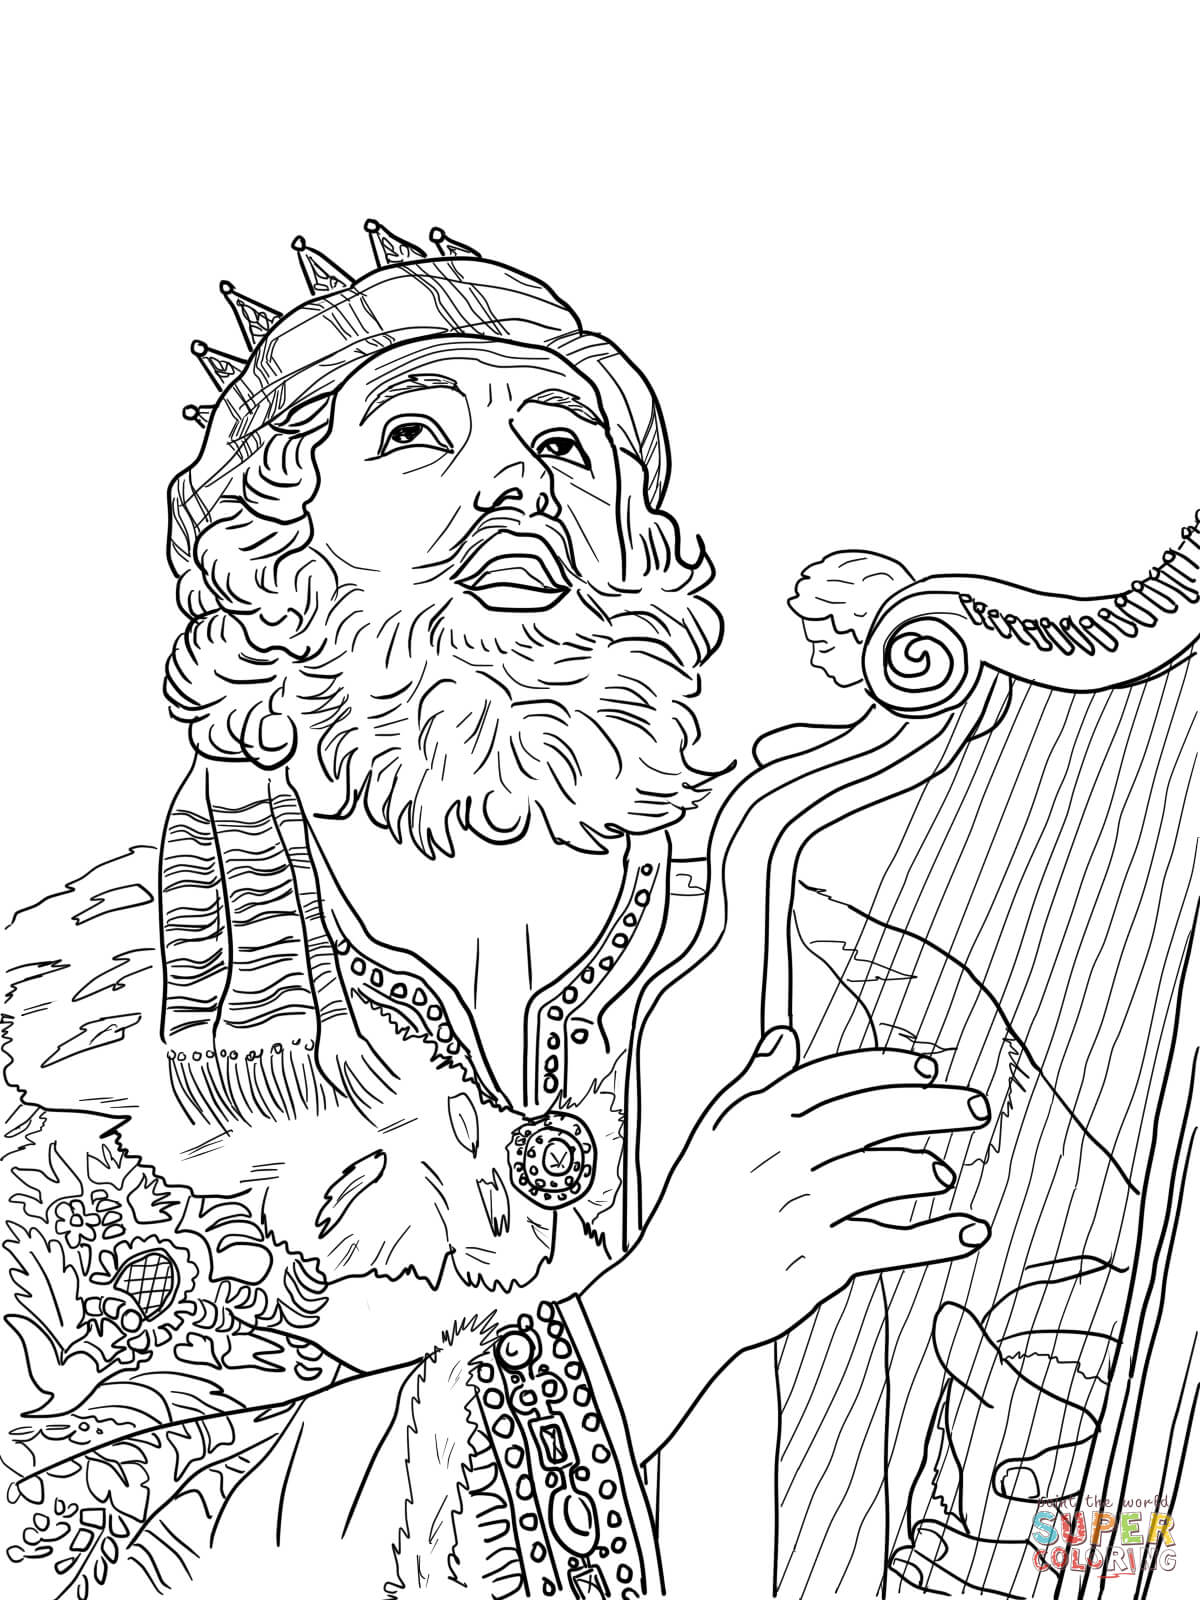 King David Playing the Harp coloring page | Free Printable Coloring Pages